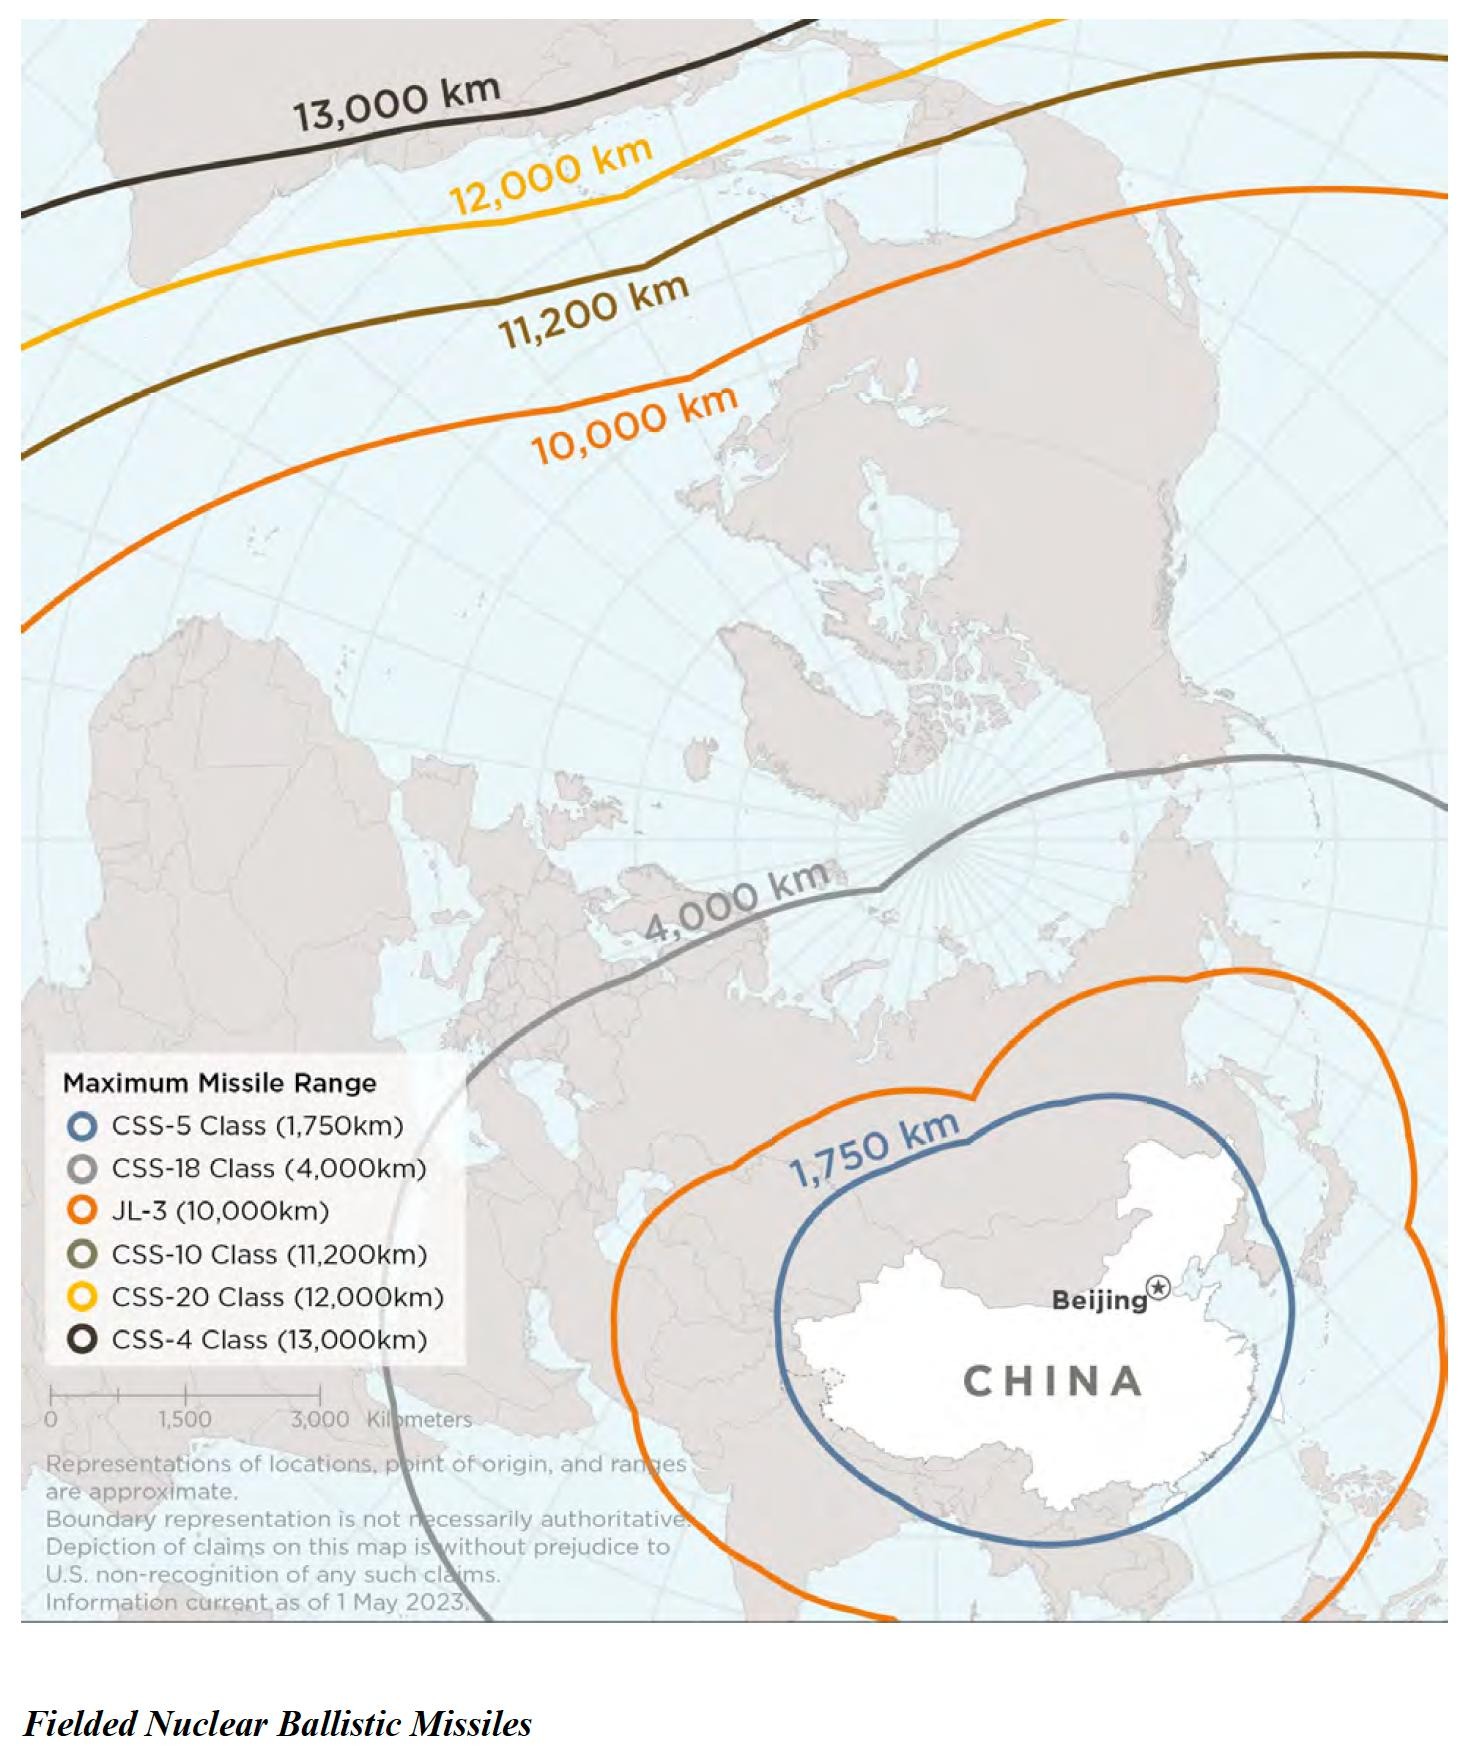 Figure 1_Nuclear Ballistic Missiles Fielded by China